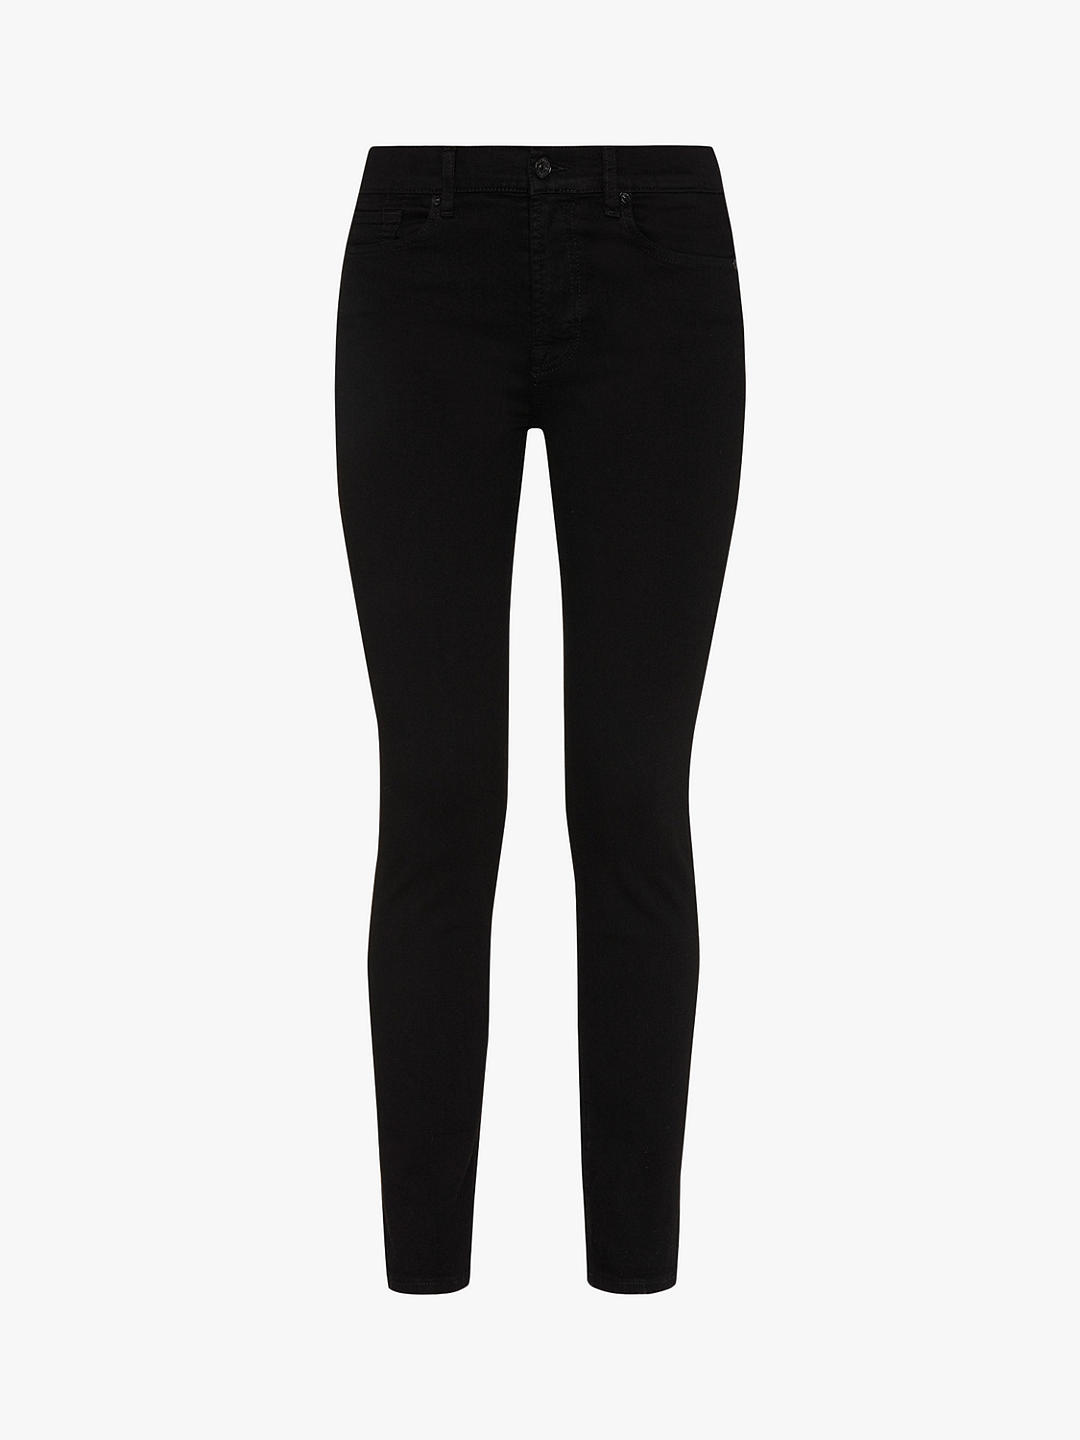 7 For All Mankind Roxanne B(Air) Jeans, Rinsed Black